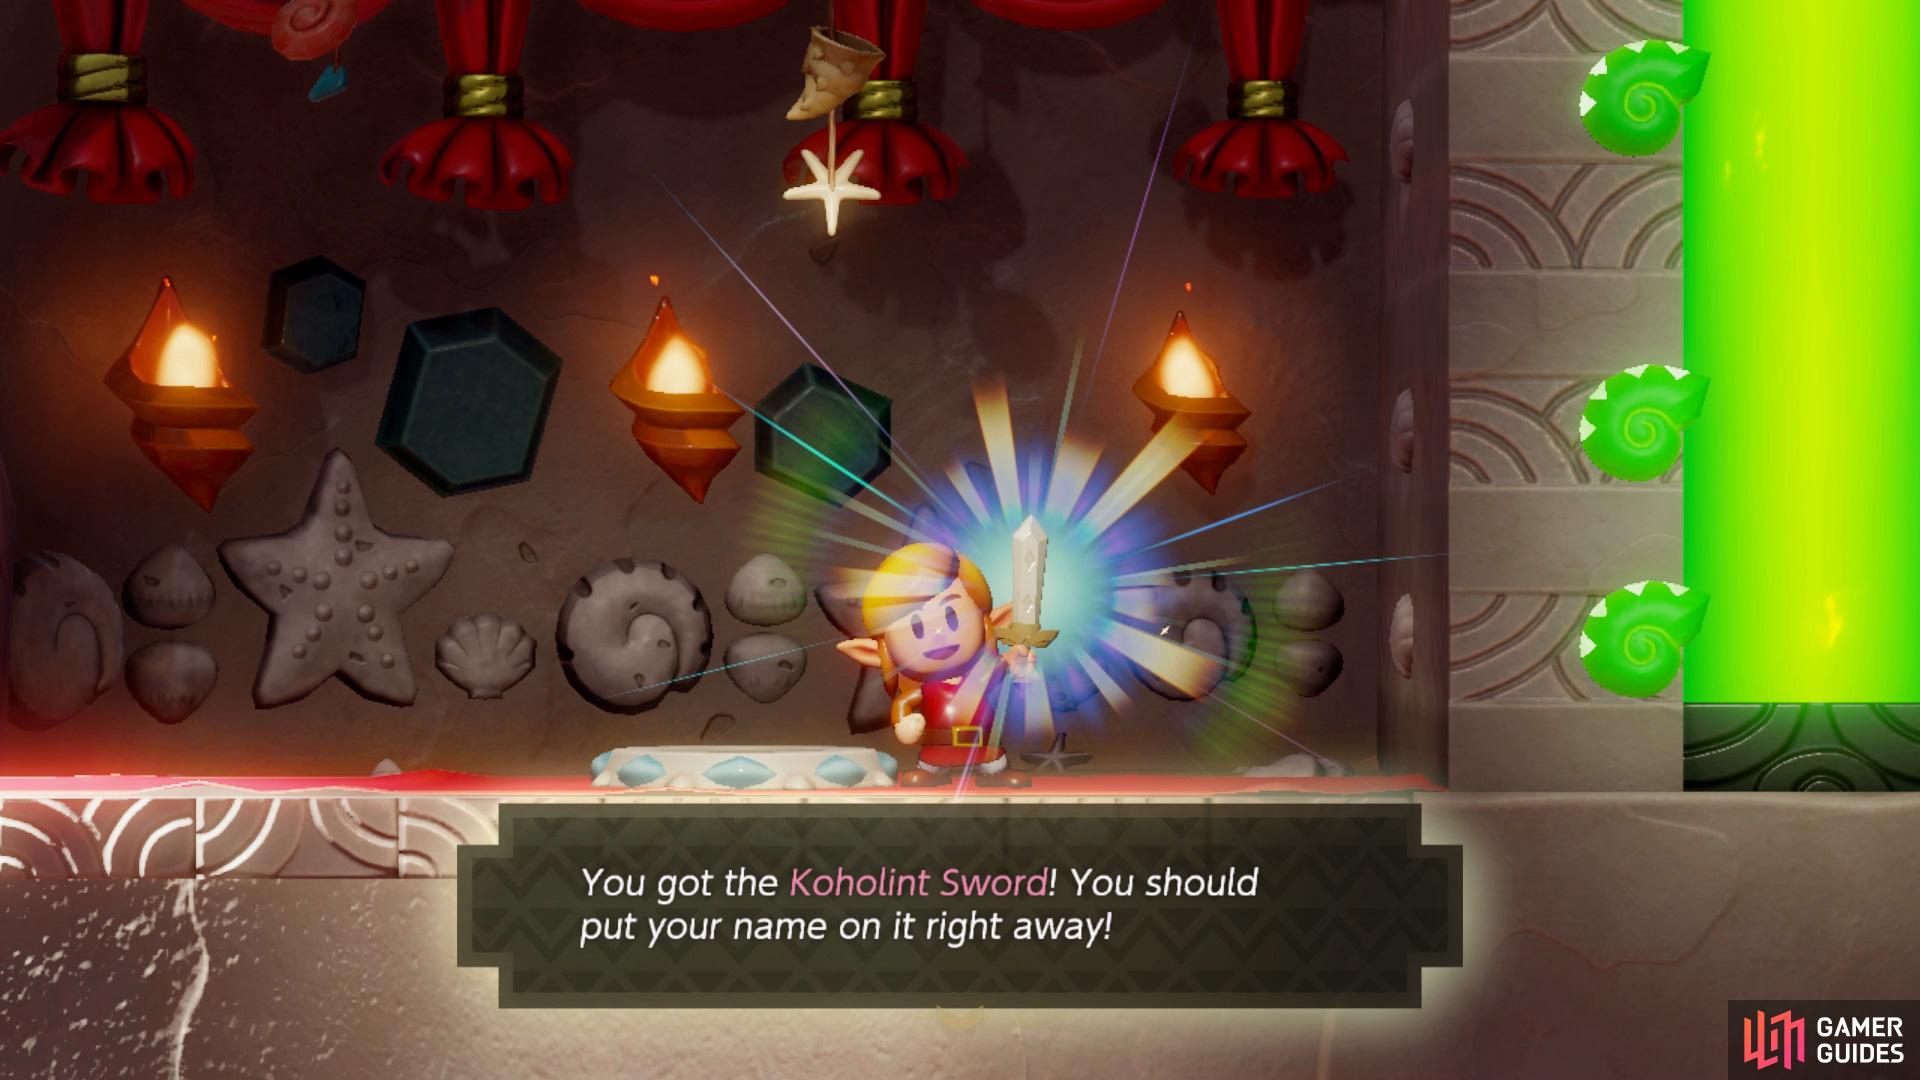 Update your amount of Secret Seashells found in the Seashell Mansion and you'll rewarded with Koholint Sword for reaching the fourth milestone